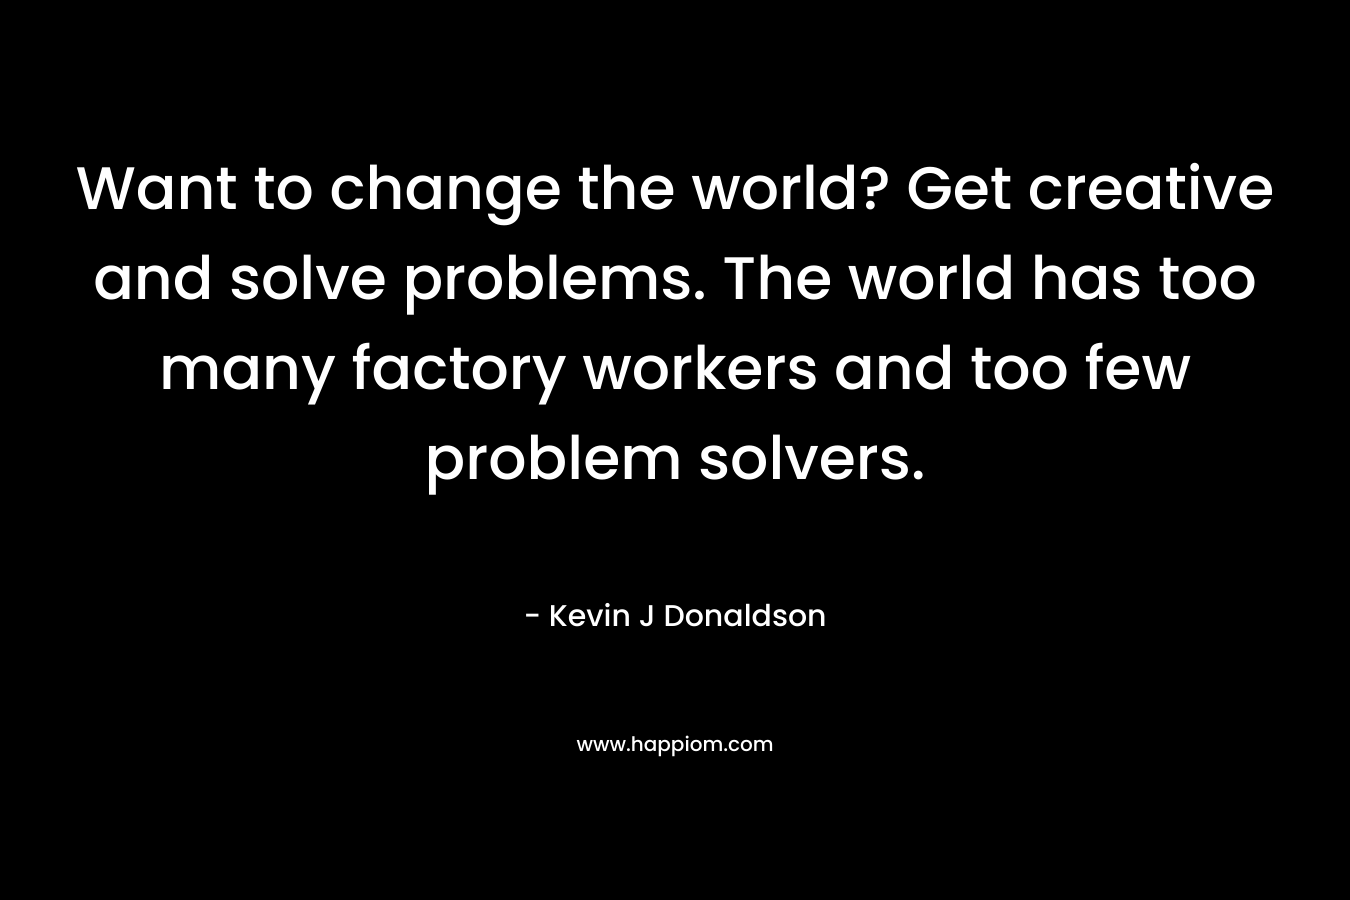 Want to change the world? Get creative and solve problems. The world has too many factory workers and too few problem solvers. – Kevin J Donaldson